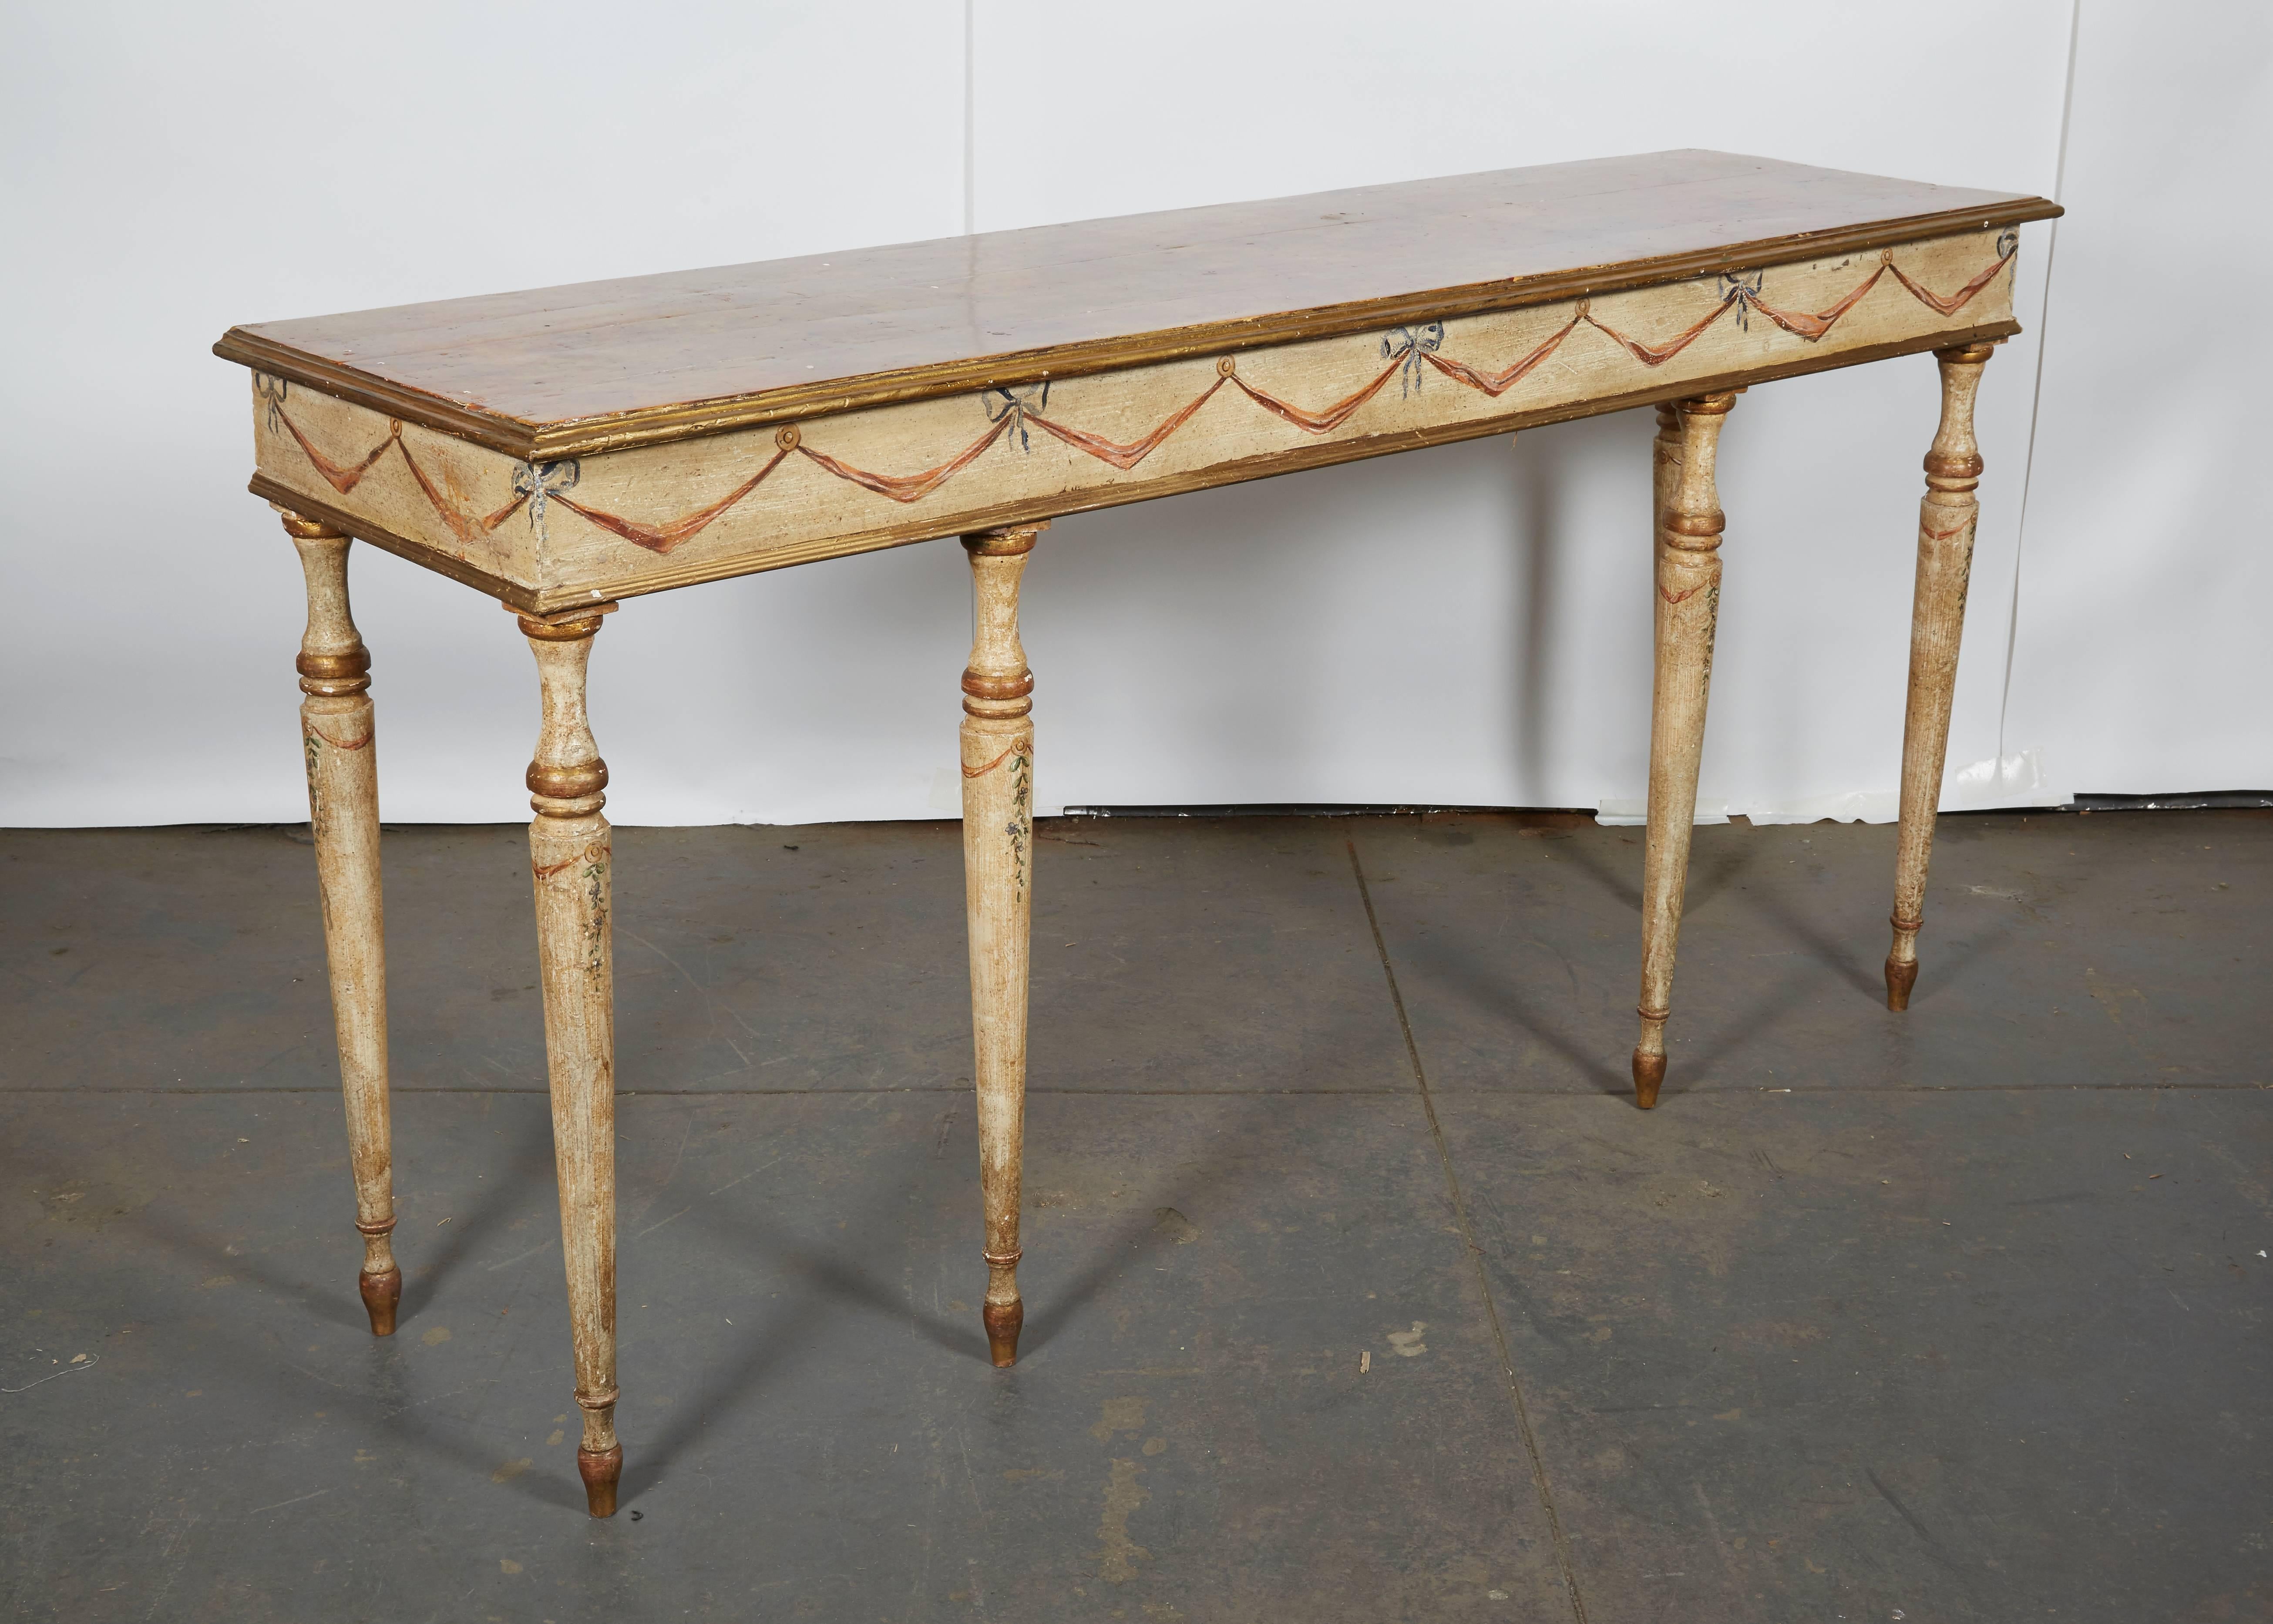 Charming neoclassical table with red faux marble-painted top with gilt moldings over an ivory-ground table with ribbon-tied swag decoration on the frieze and floral garlands on the legs.